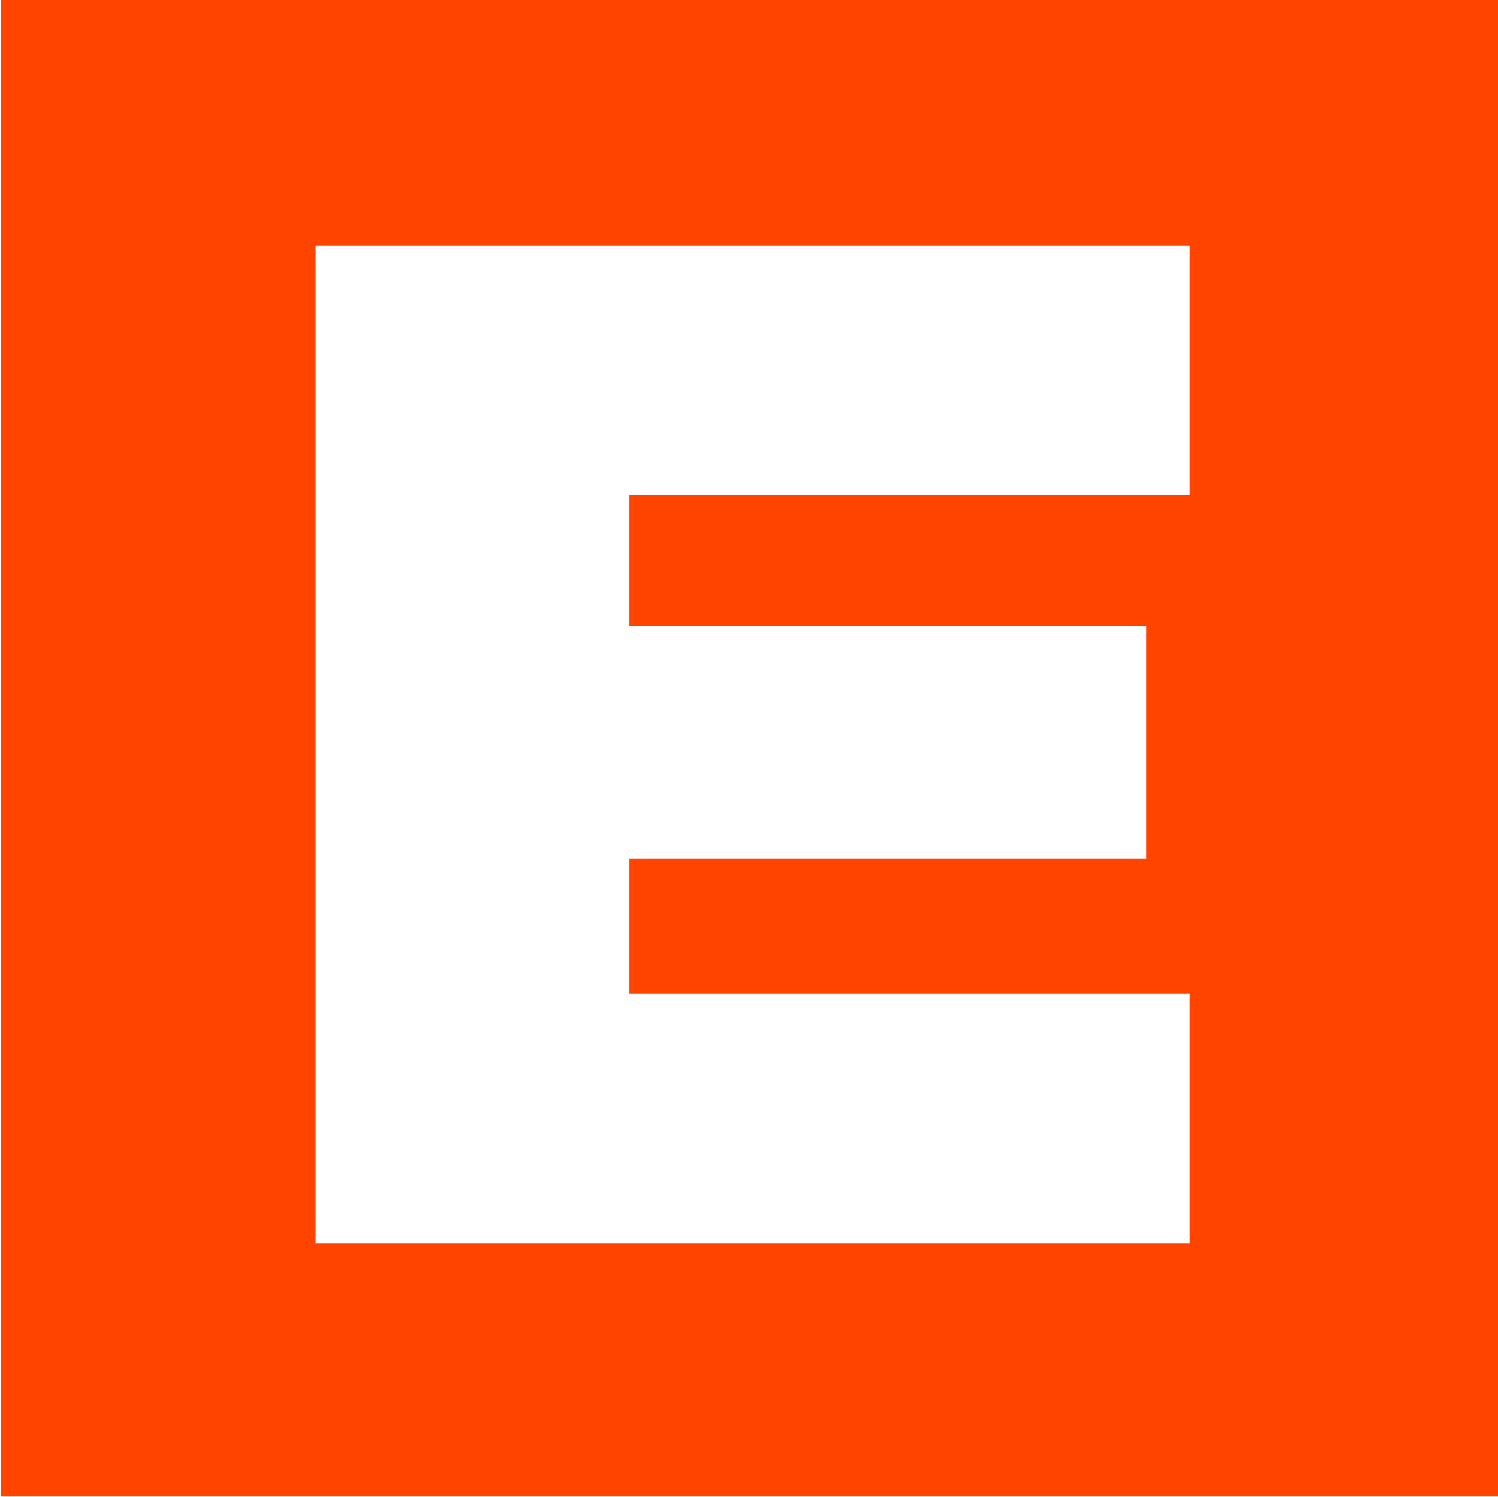 E INC (E Automotive) logo in transparent PNG and vectorized SVG formats